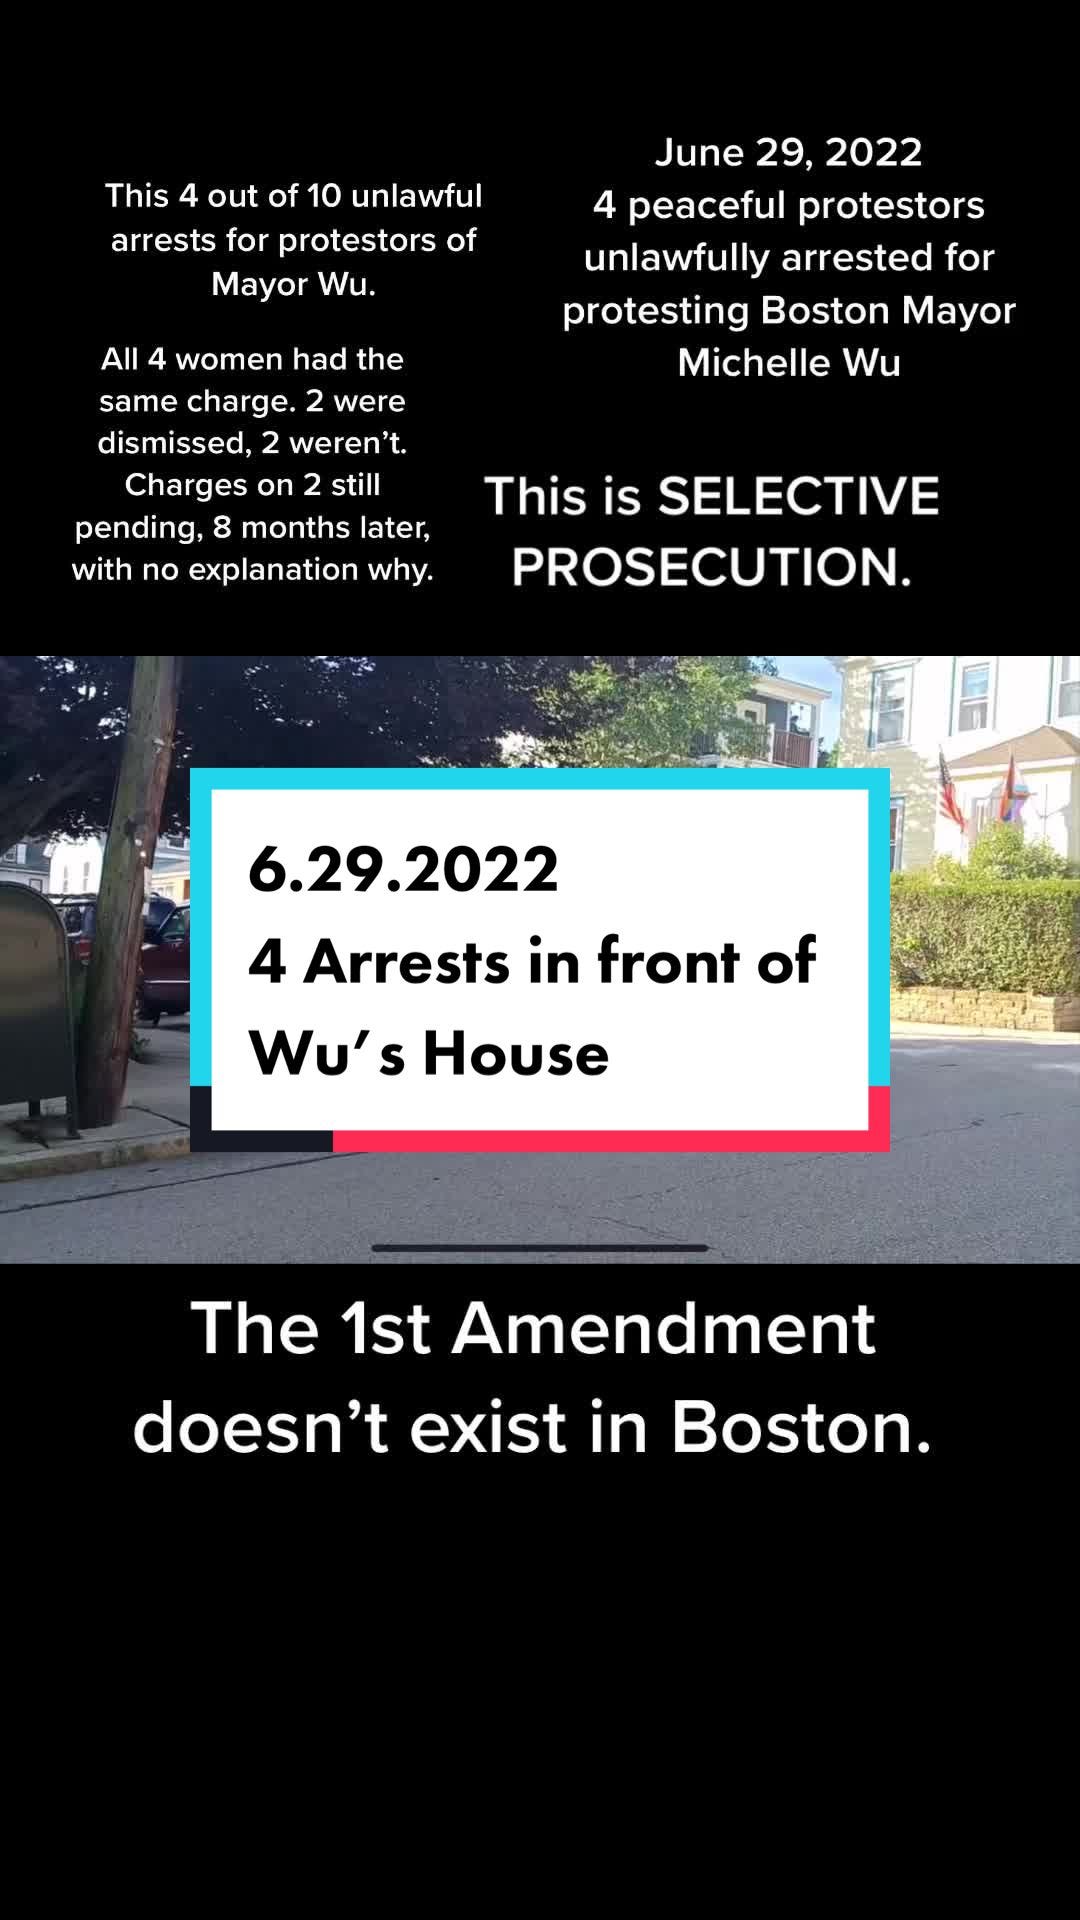 Prosecution of the 1st Amendment in Boston Series: Catherine Vitale & Shannon Llewelyn - Peaceful Protestors from Wu's "Enemy List" Are Still In Court 17 months after the unlawful arrest in June 2022